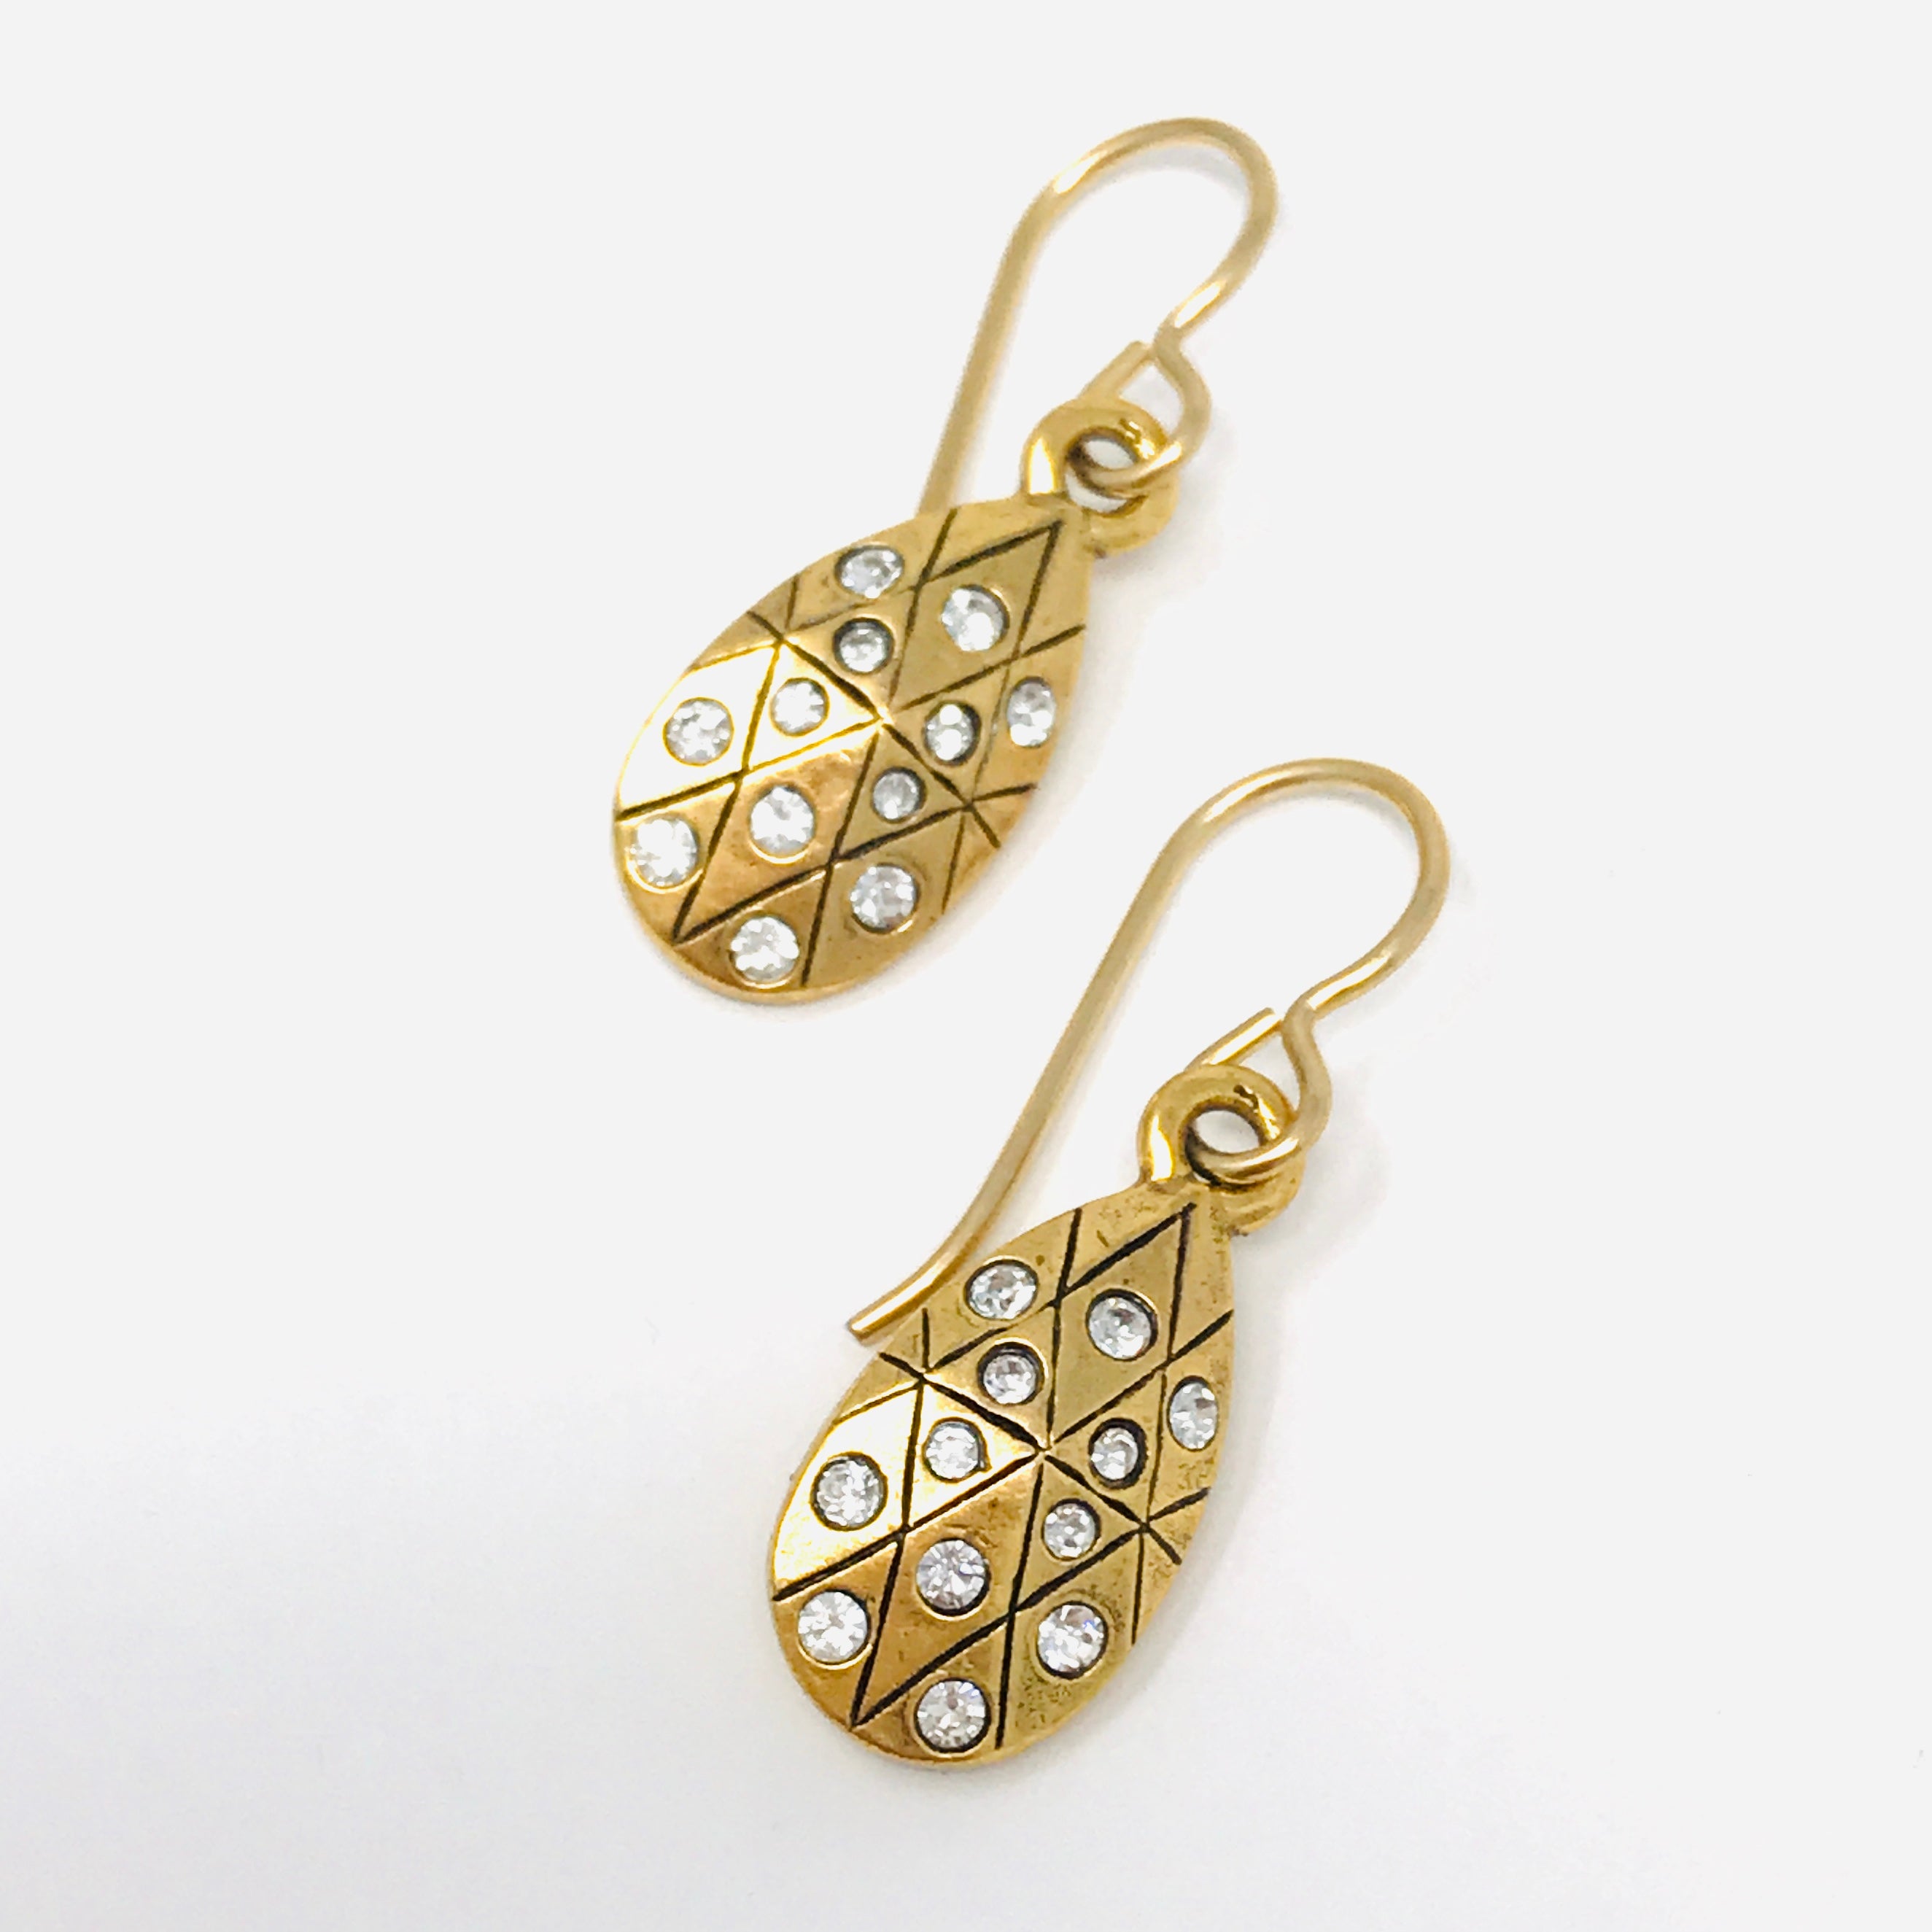 gold pendant earrings with stones